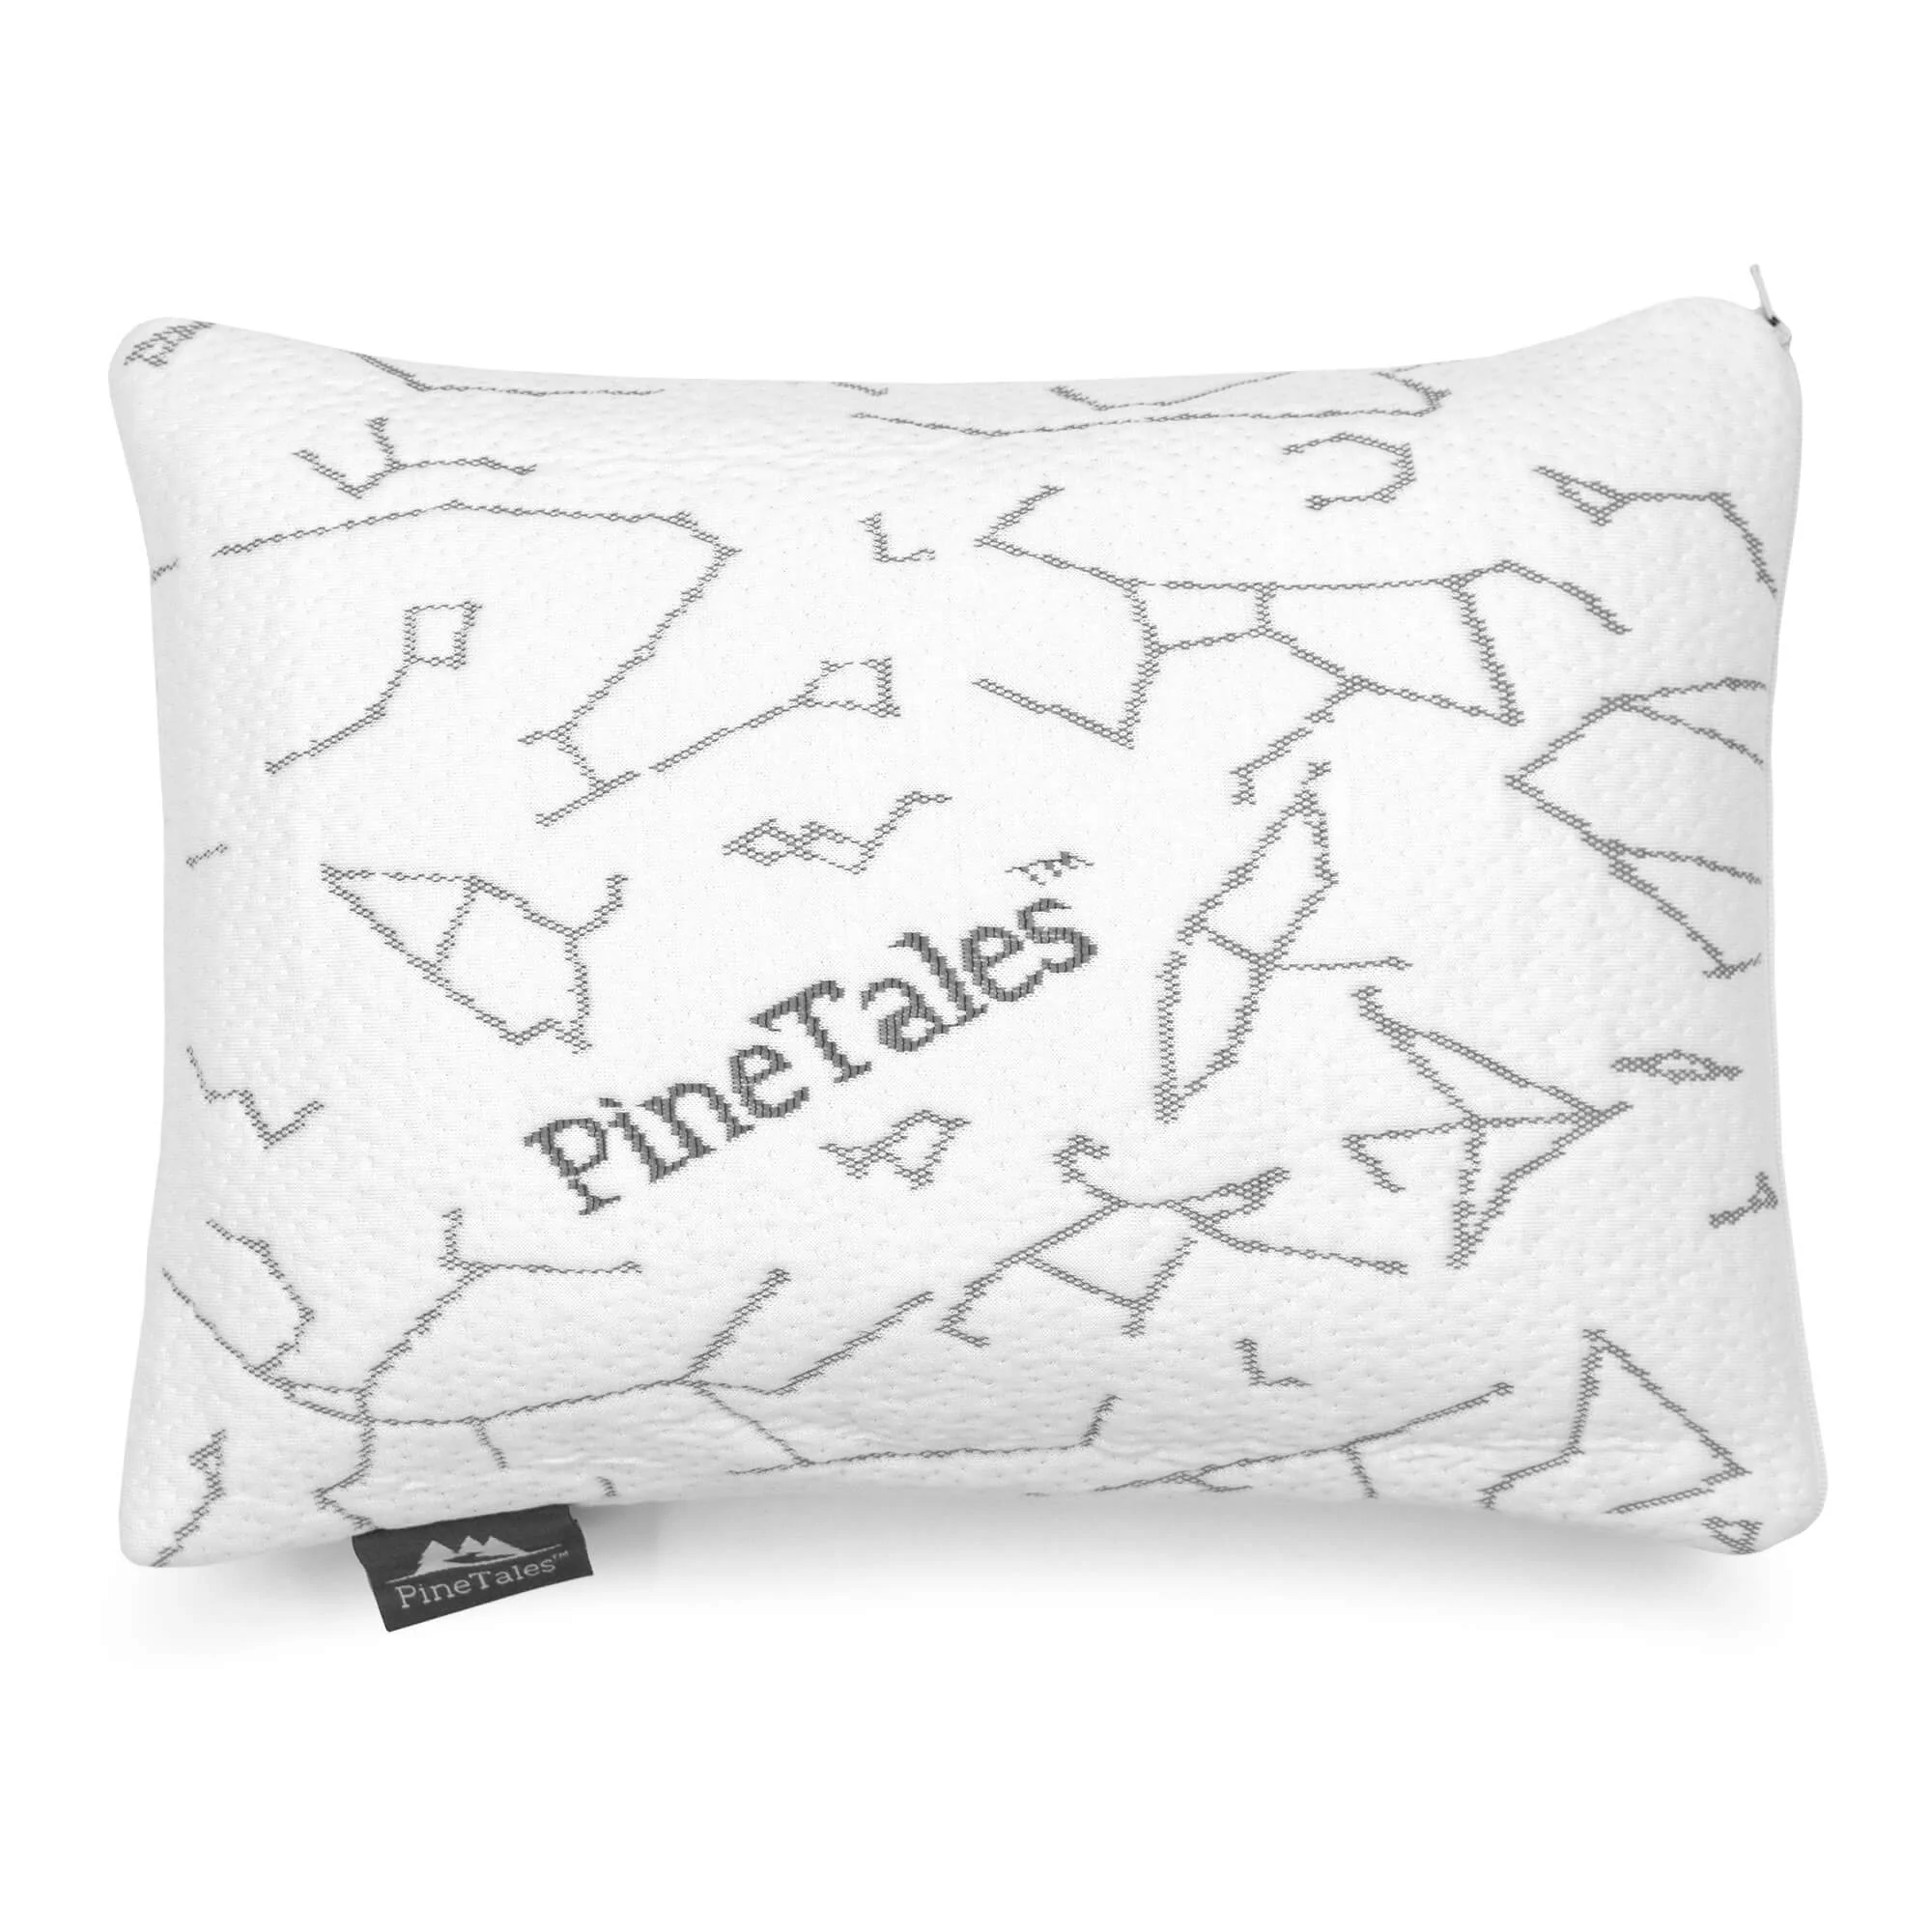 PineTales-Travel-Pillow-Top-View-Image